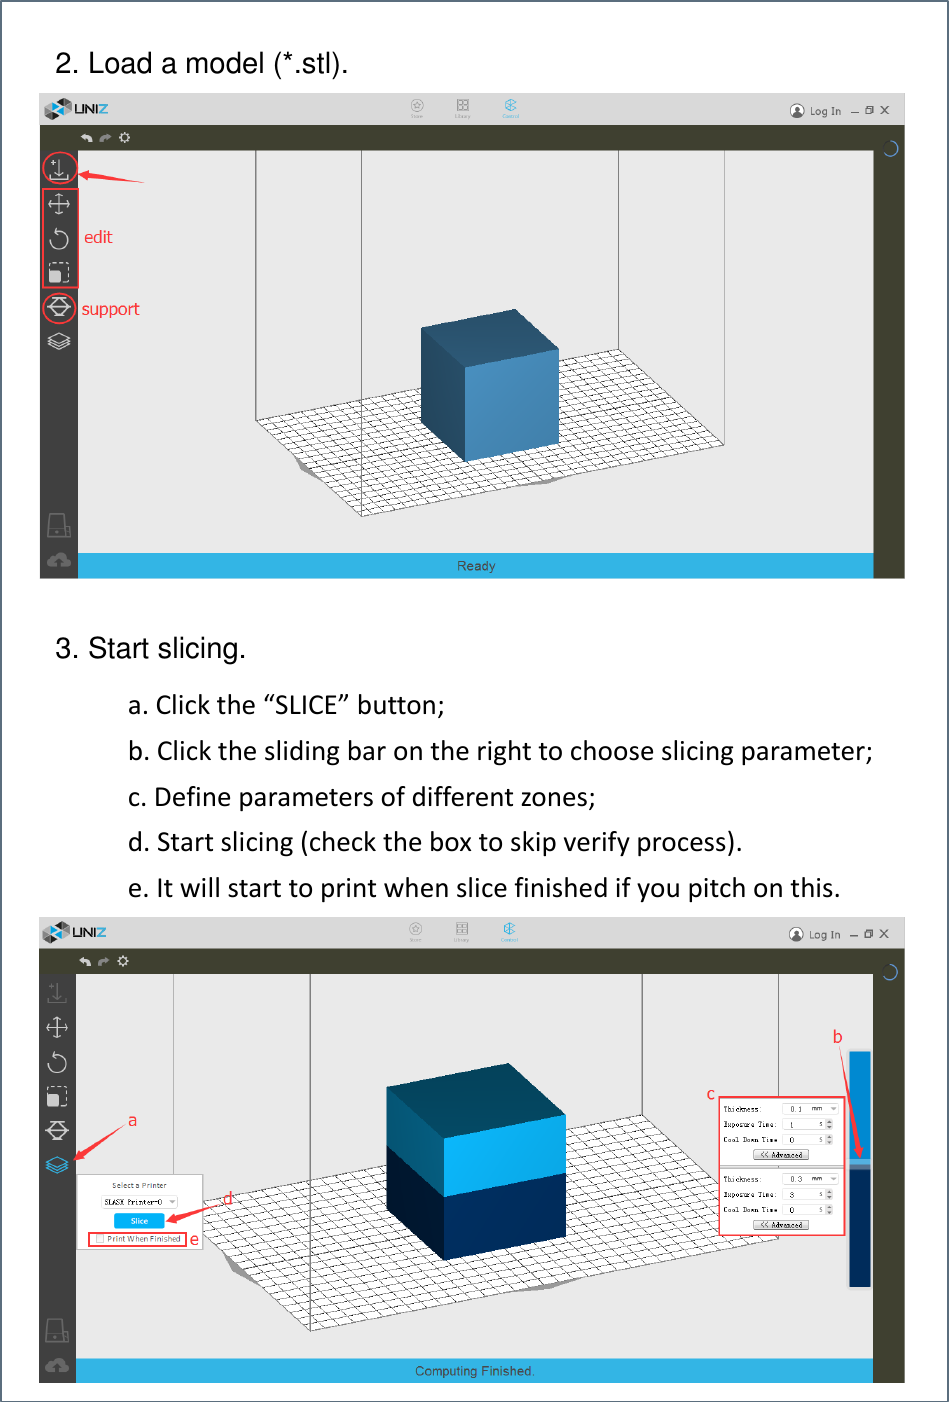      a. Click the “SLICE” button; b. Click the sliding bar on the right to choose slicing parameter; c. Define parameters of different zones; d. Start slicing (check the box to skip verify process). e. It will start to print when slice finished if you pitch on this.   2. Load a model (*.stl). 3. Start slicing. 